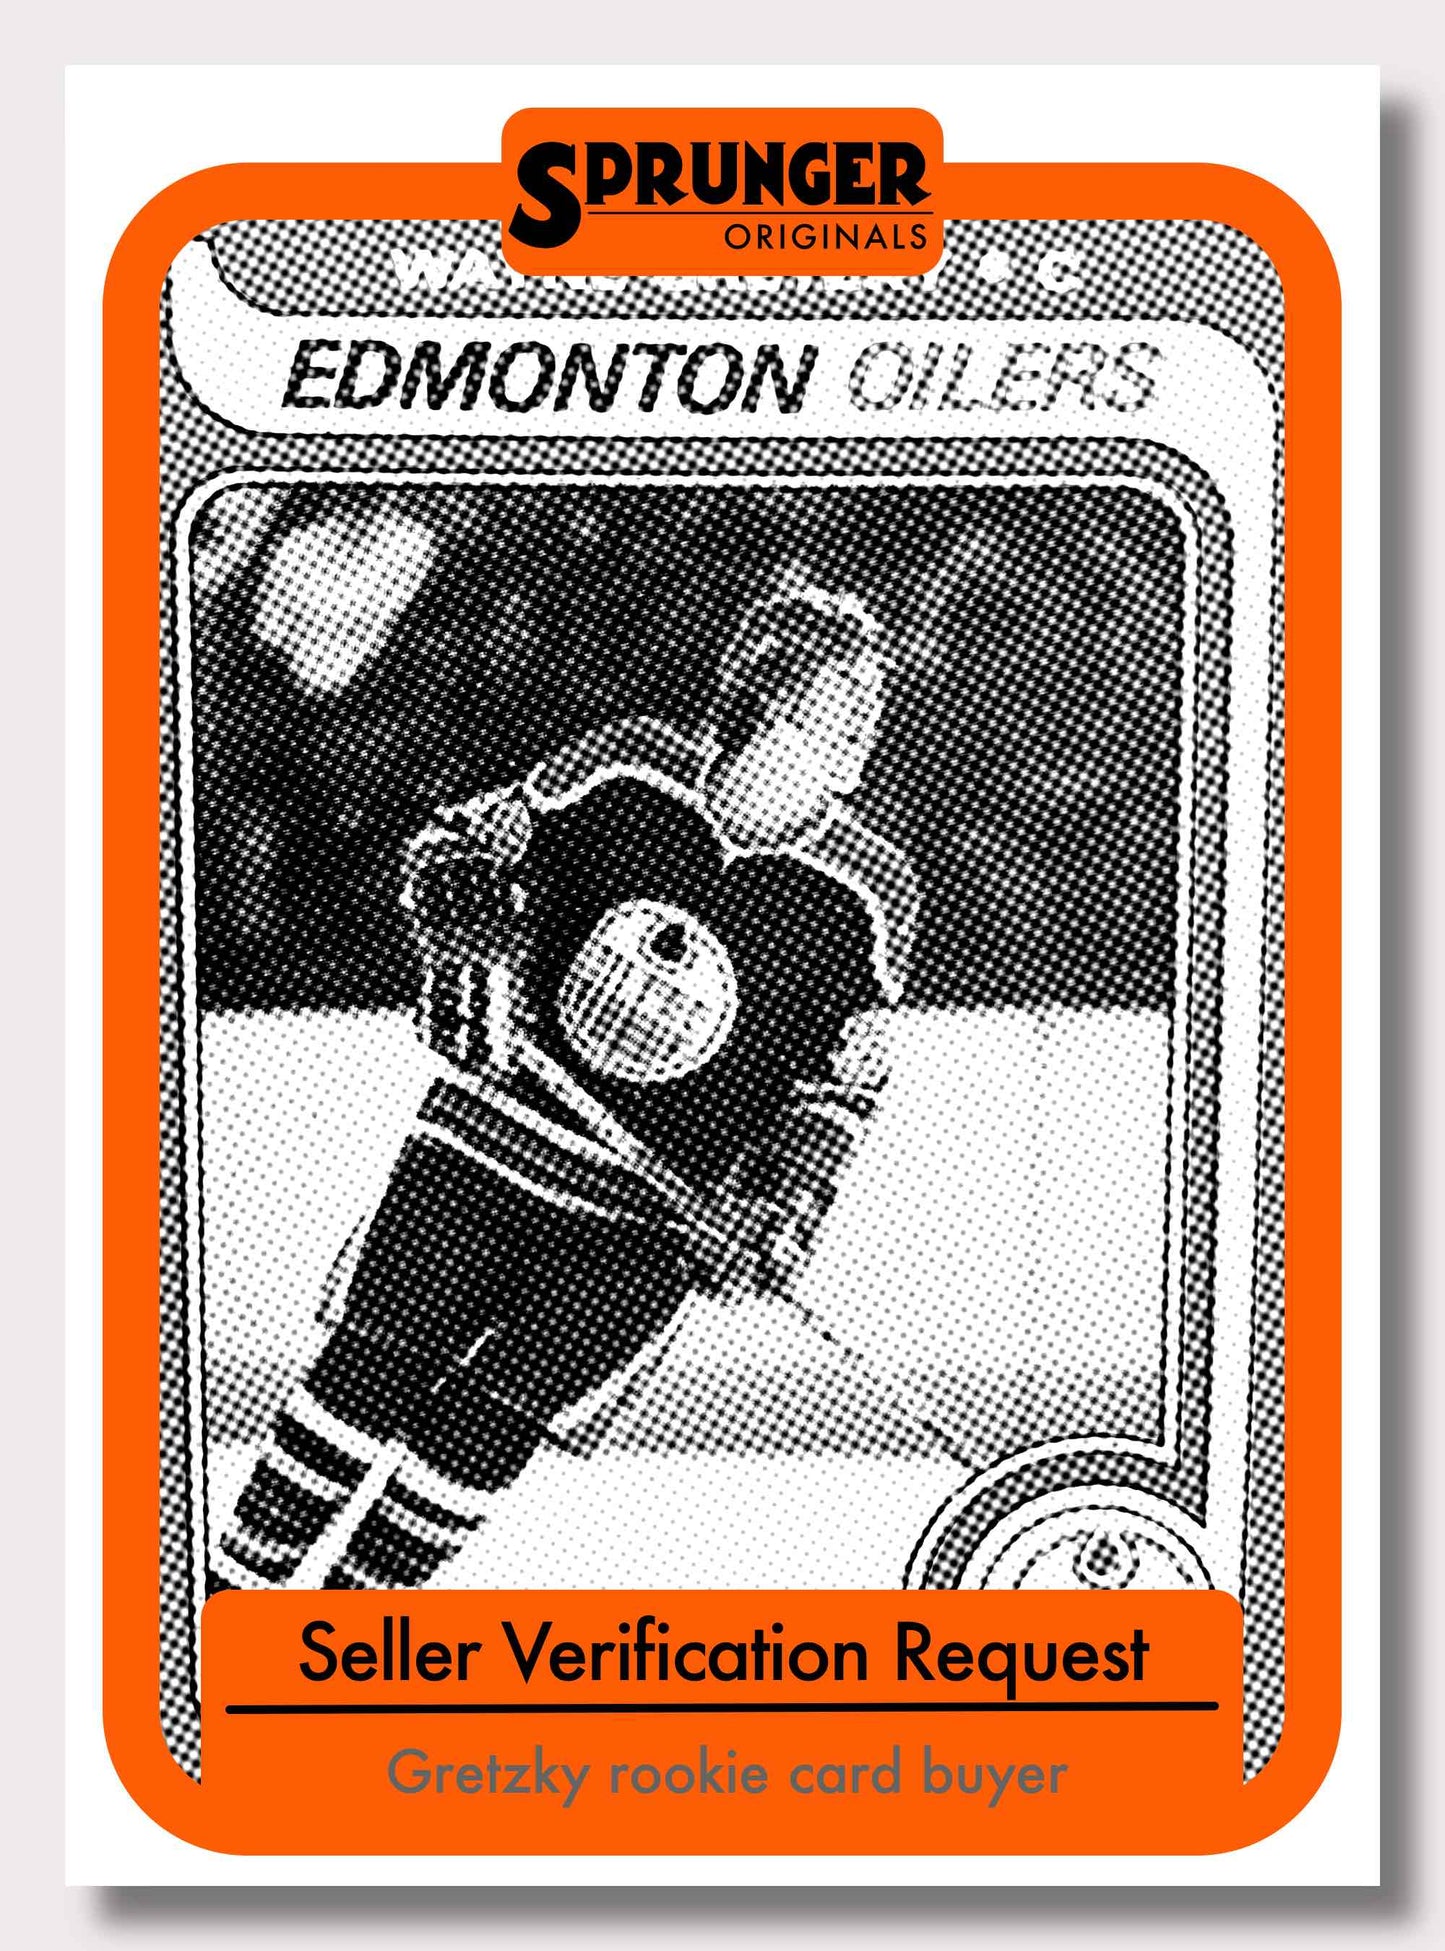 Seller Verification Request for Gretzky rookie card